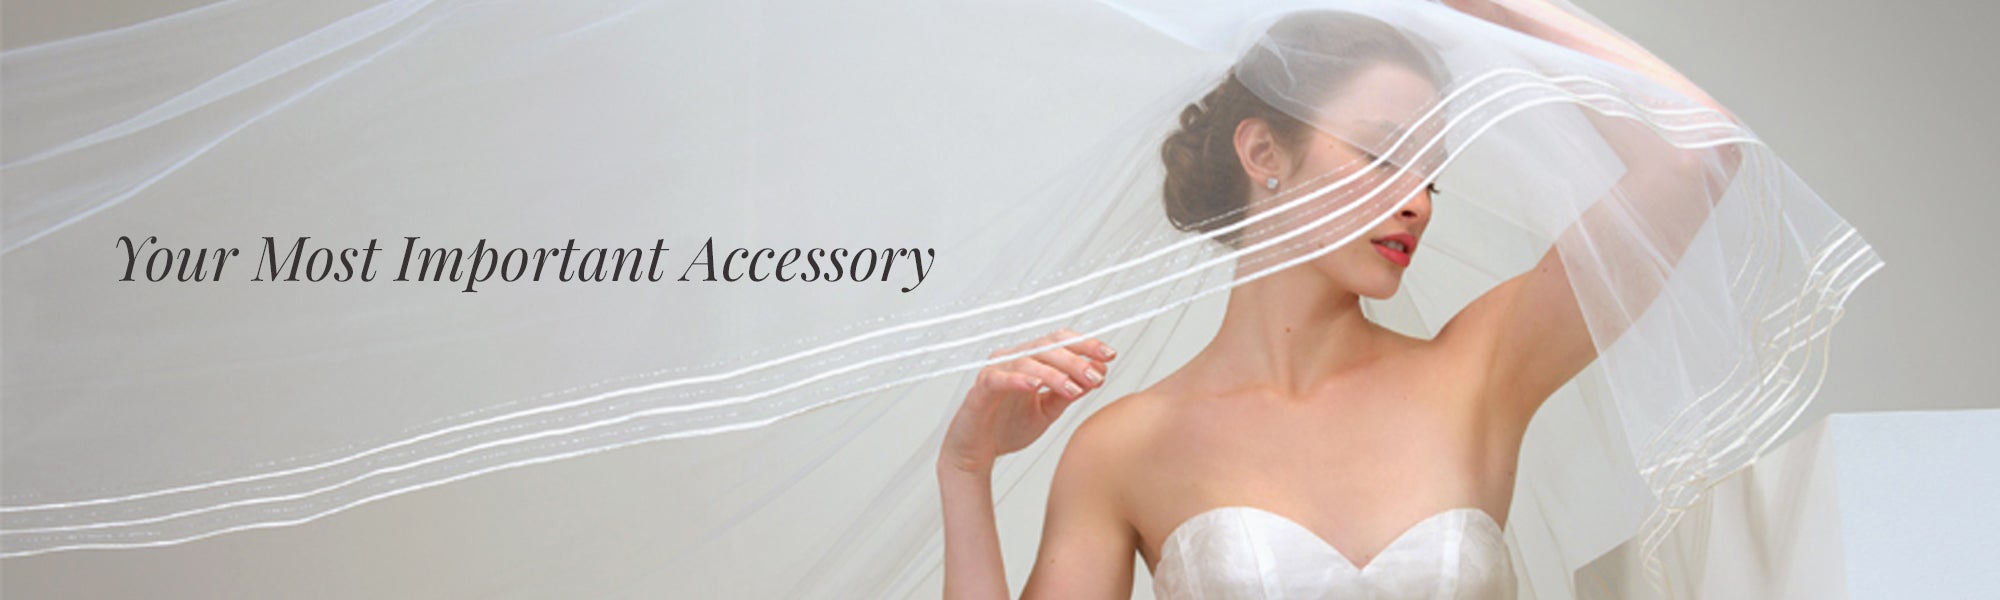 Veils Your most important accessory